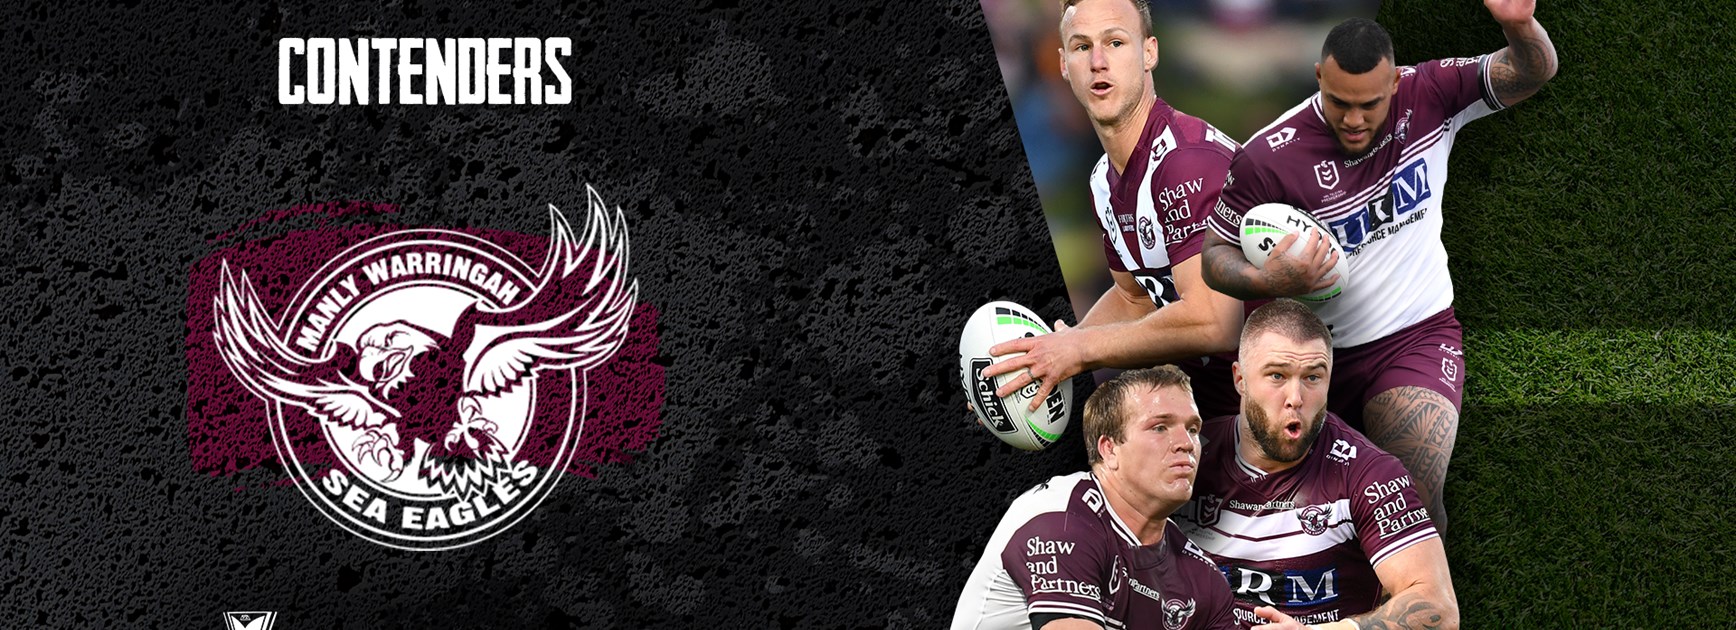 Sea Eagles: Contenders for The Players’ Champion 2020